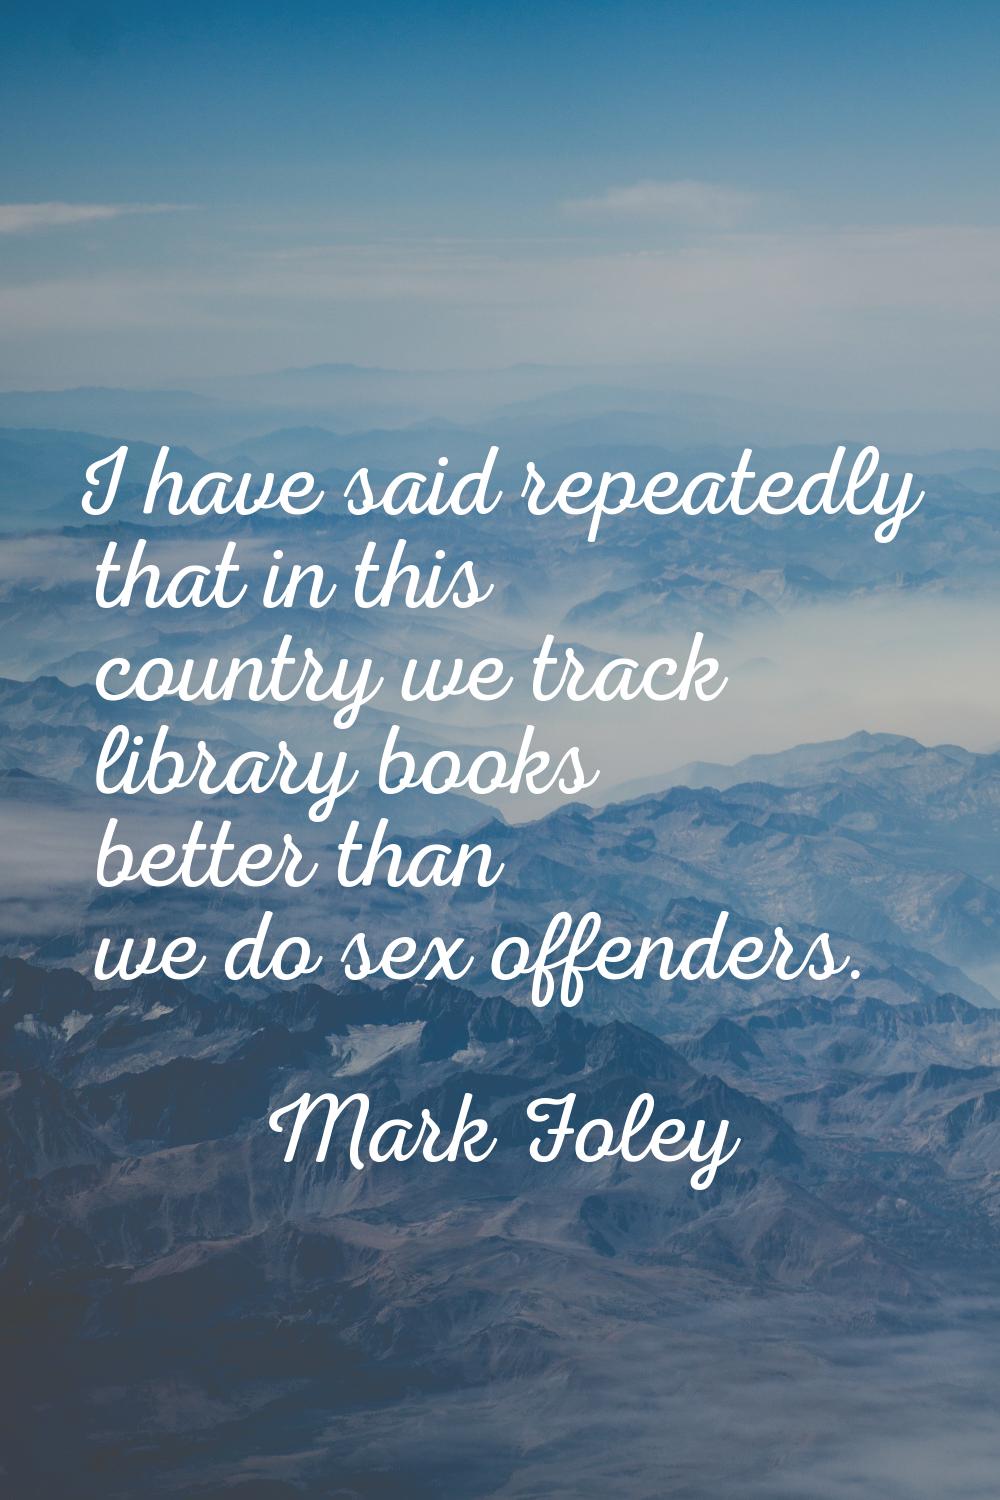 I have said repeatedly that in this country we track library books better than we do sex offenders.